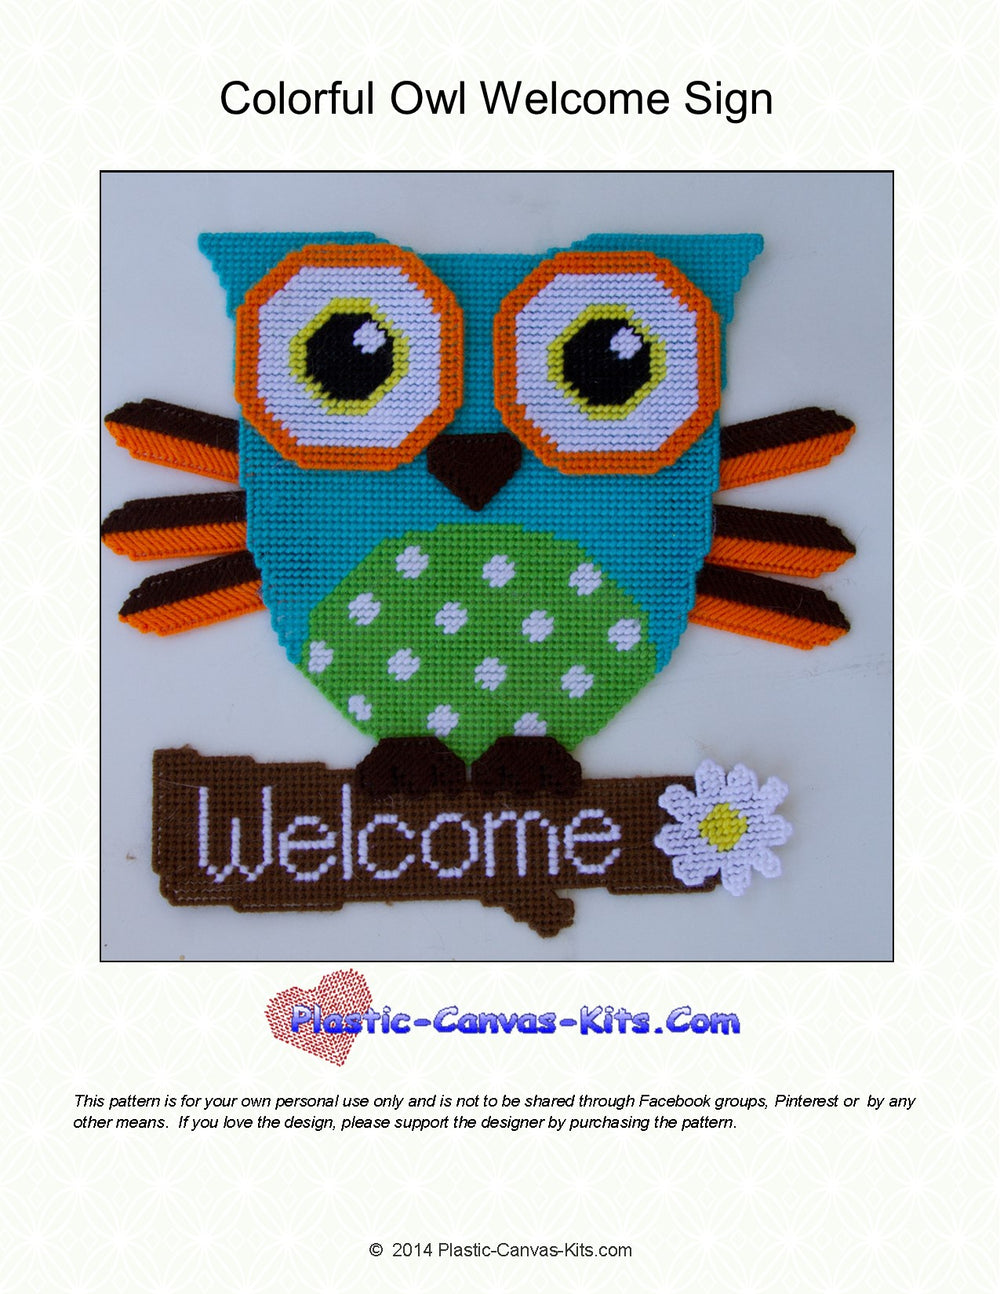 Colorful Owl Welcome Sign